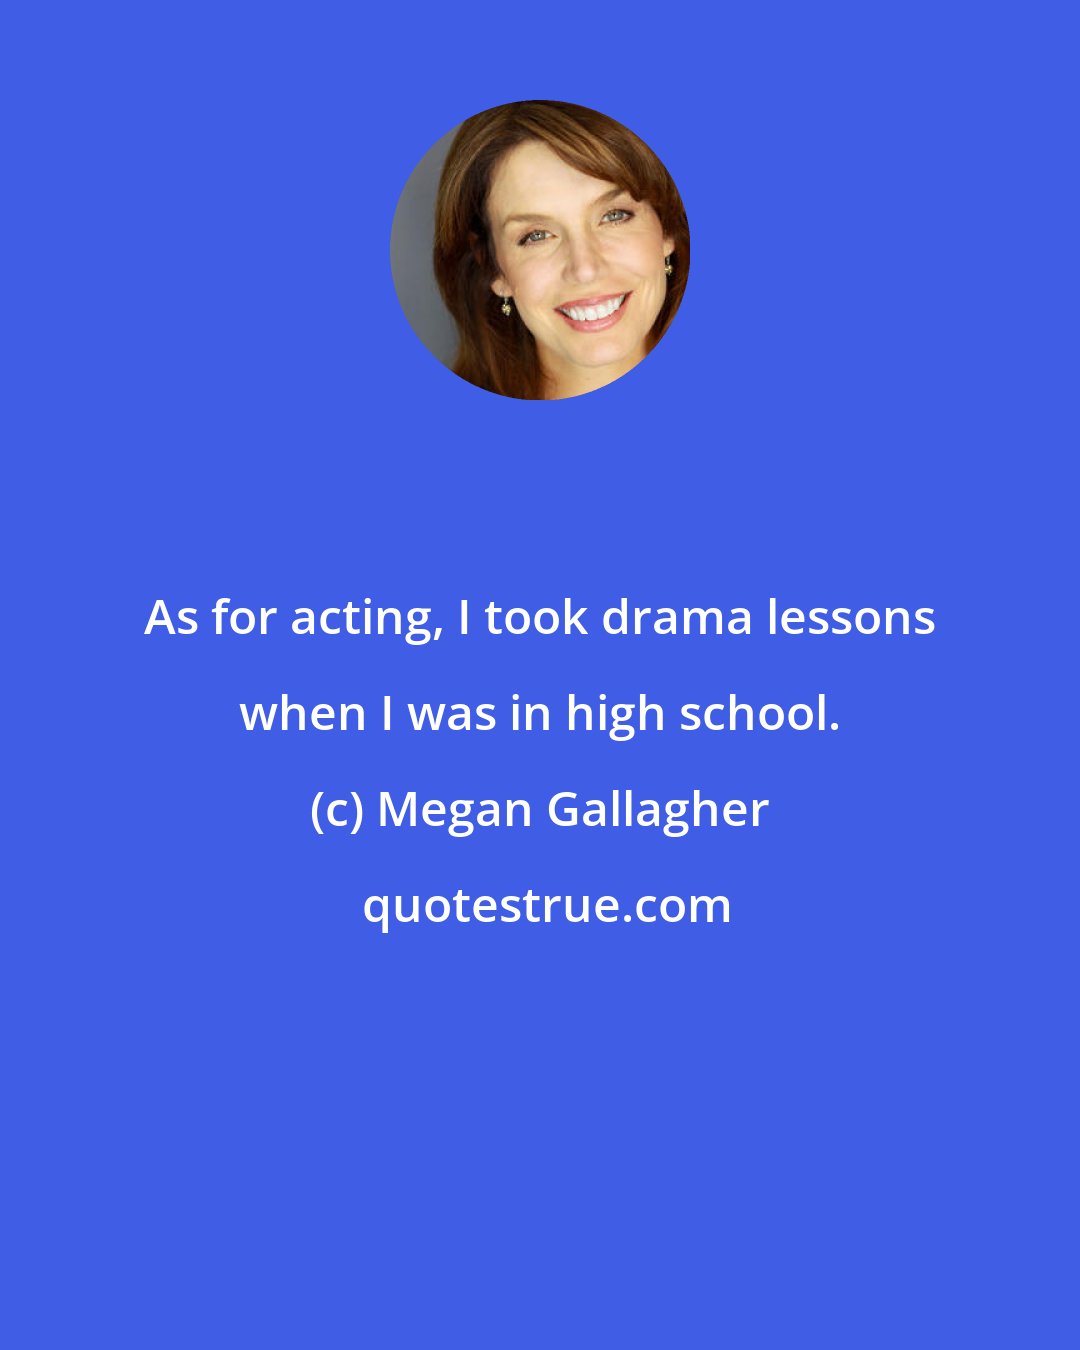 Megan Gallagher: As for acting, I took drama lessons when I was in high school.